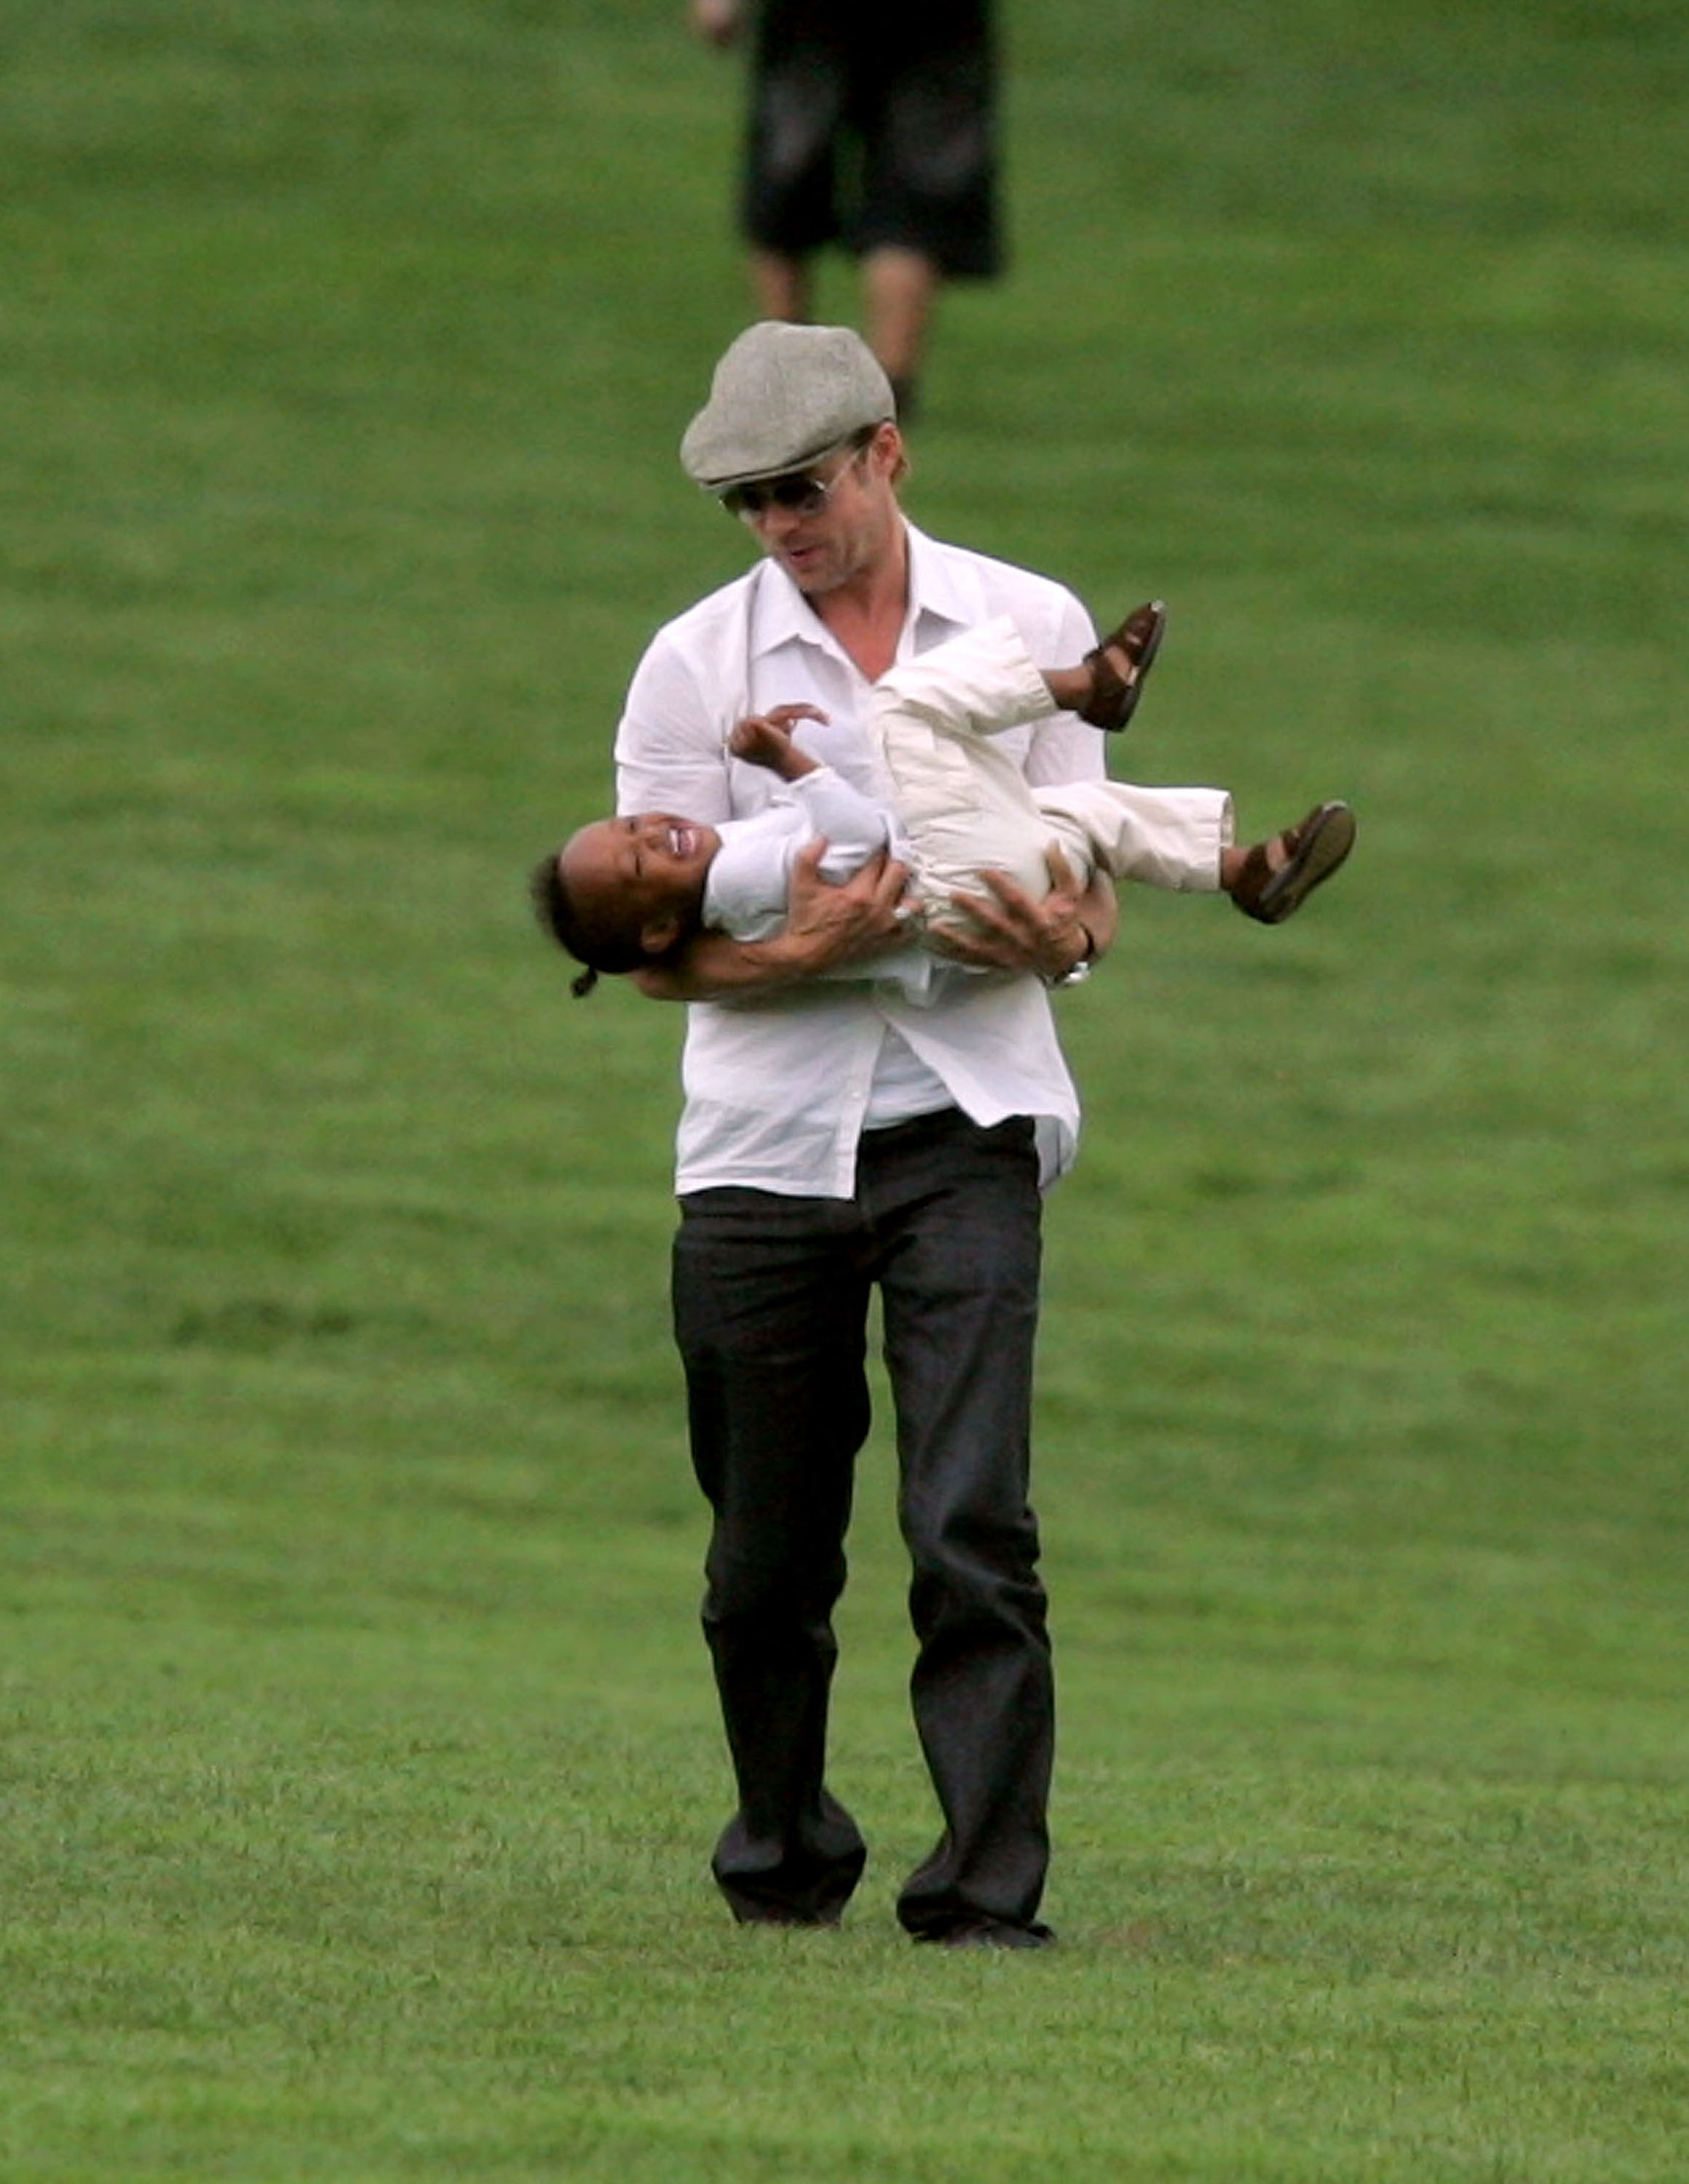 The girl and her dad visit Central Park in New York City on August 28, 2007. | Source: Getty Images